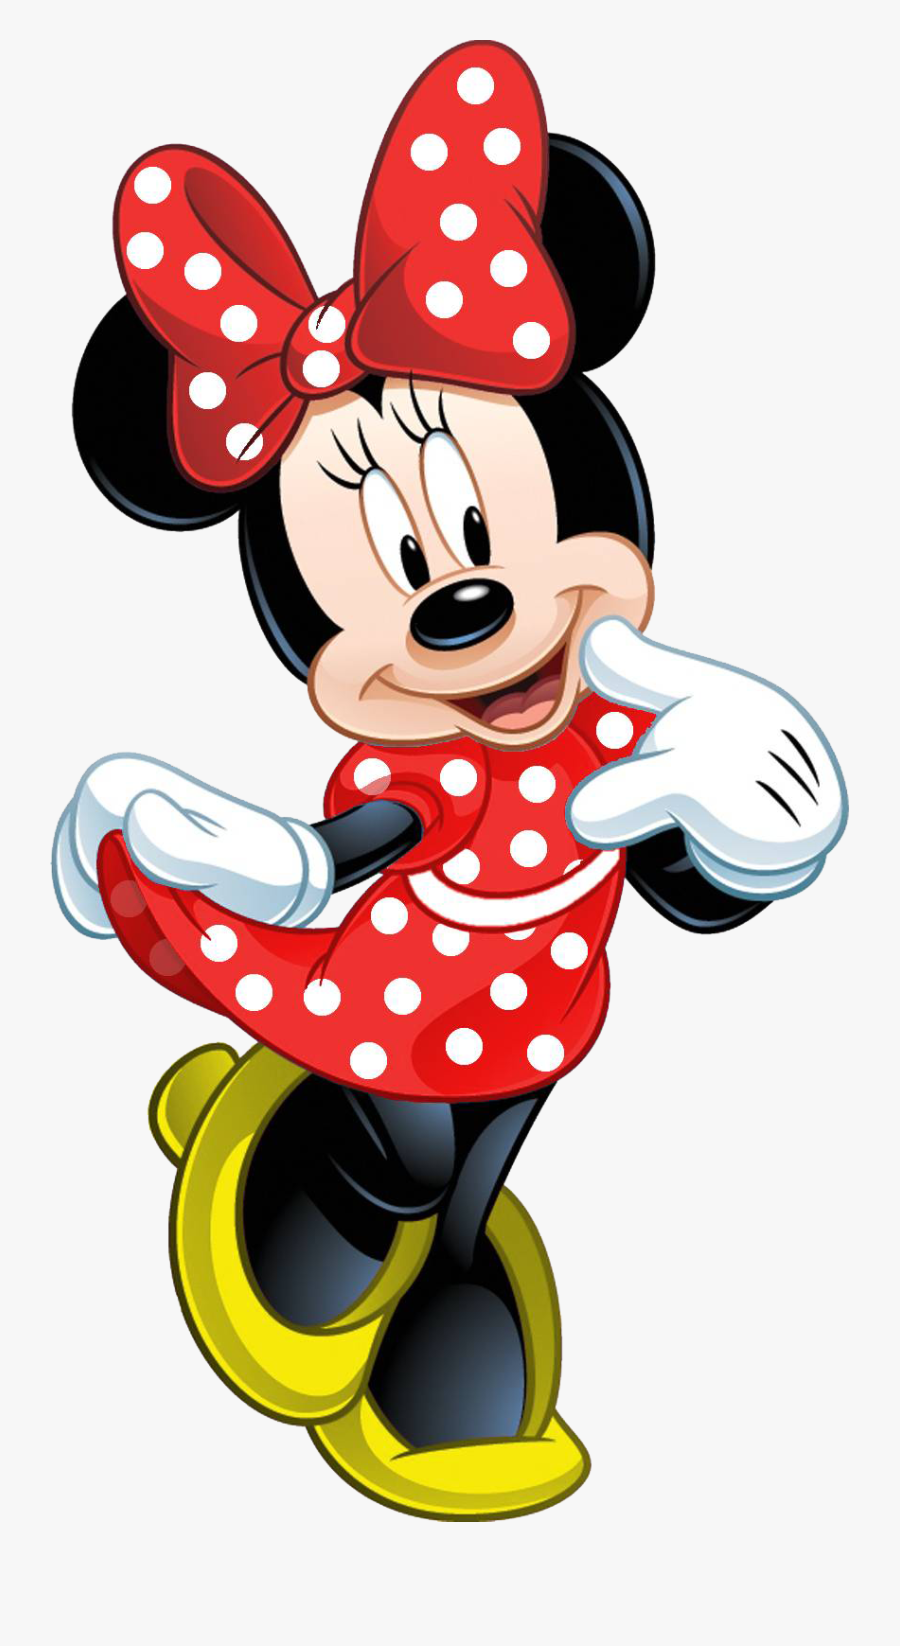 Minnie Mouse - Minnie Mouse High Resolution, Transparent Clipart